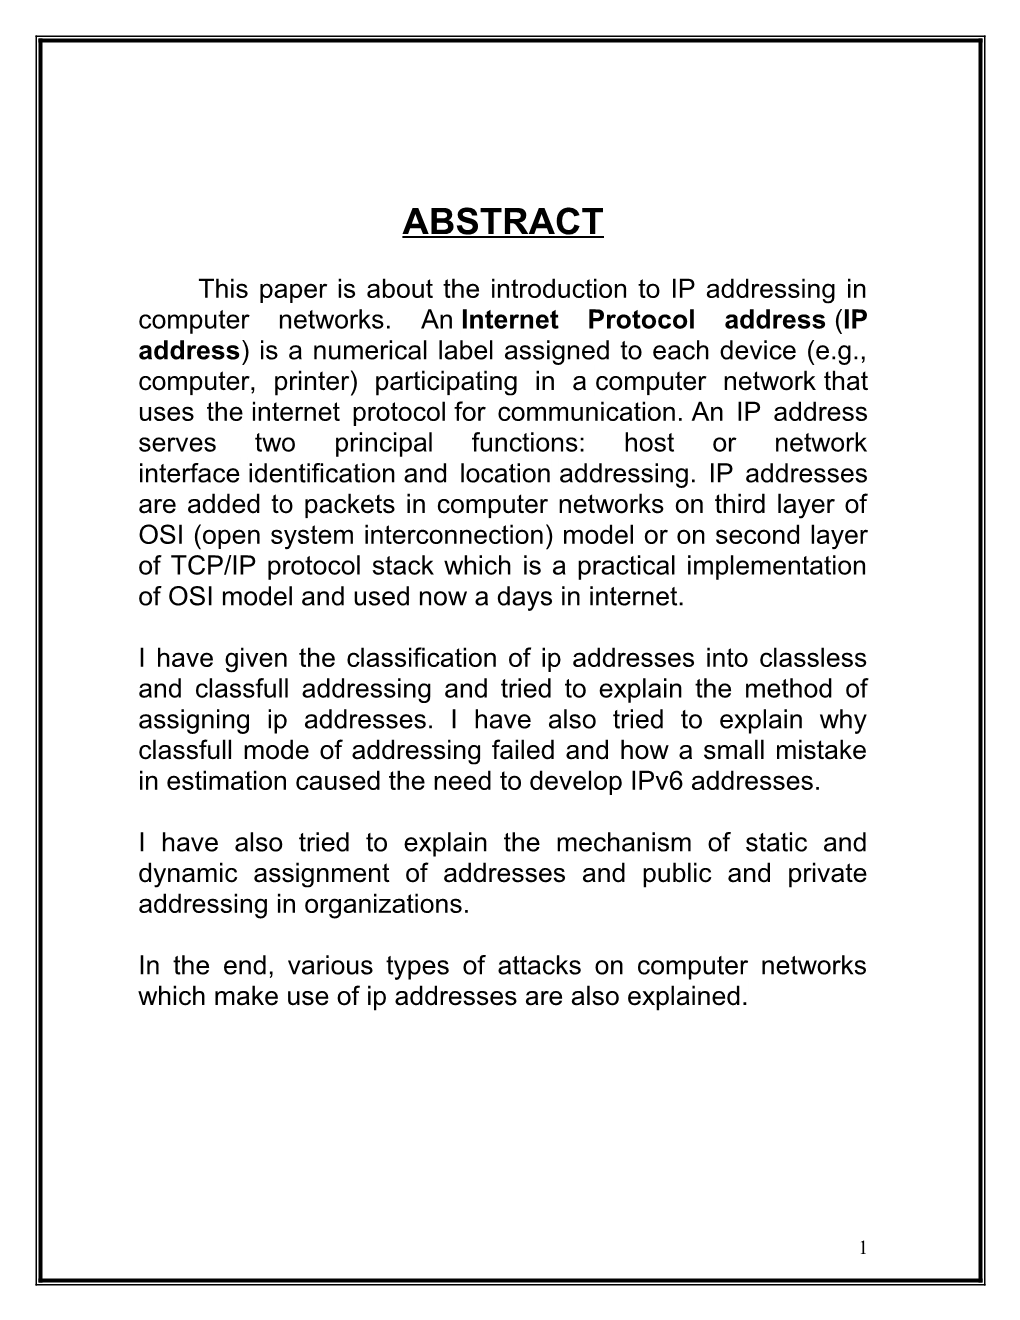 This Paper Is About the Introduction to IP Addressing in Computer Networks. an Internet